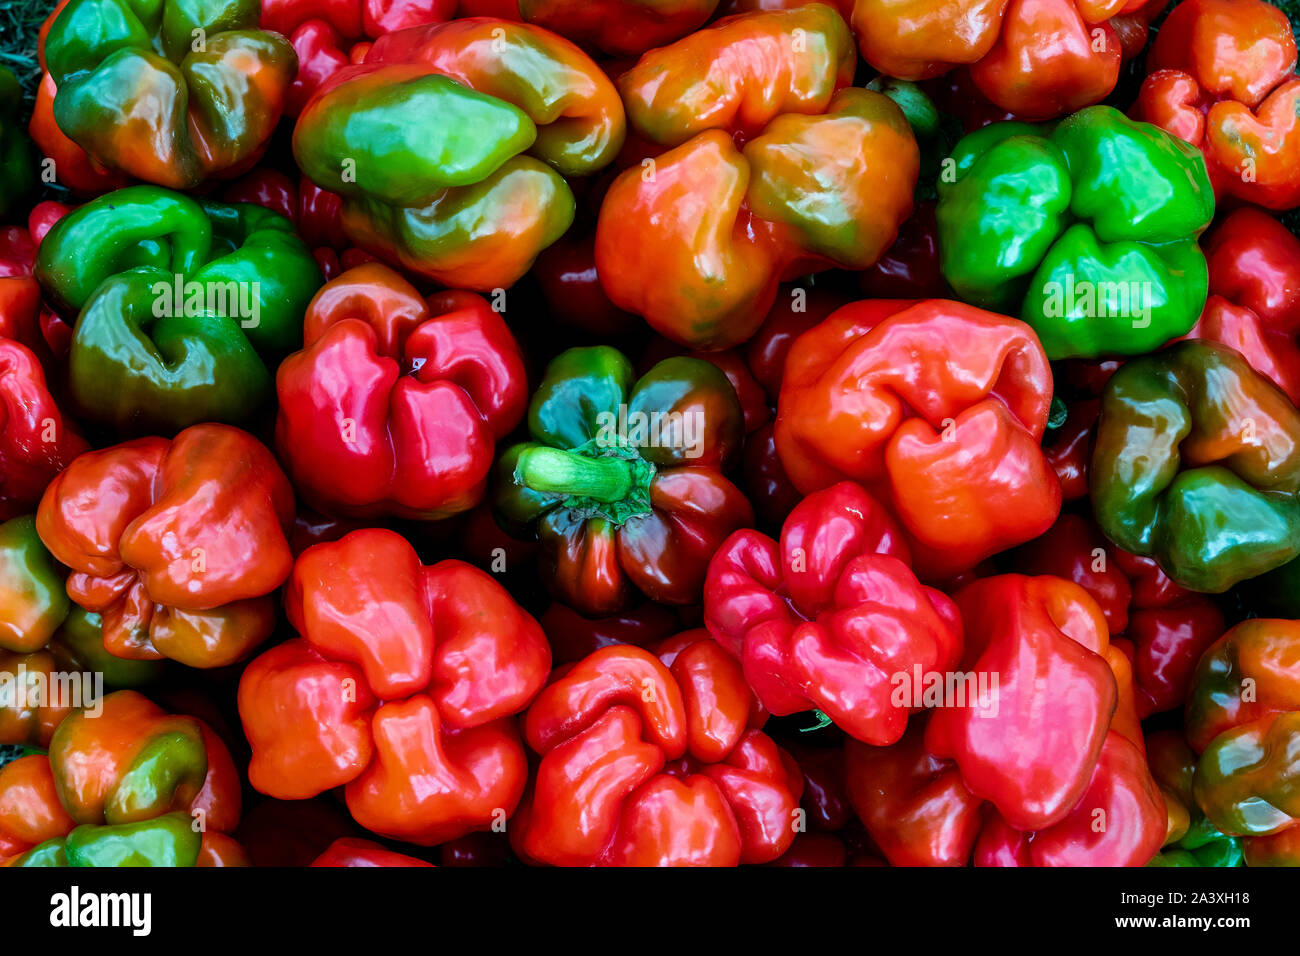 Organic ripe peppers in different colors are shown as background in a pattern of fresh ingredients for a healthy meal Stock Photo